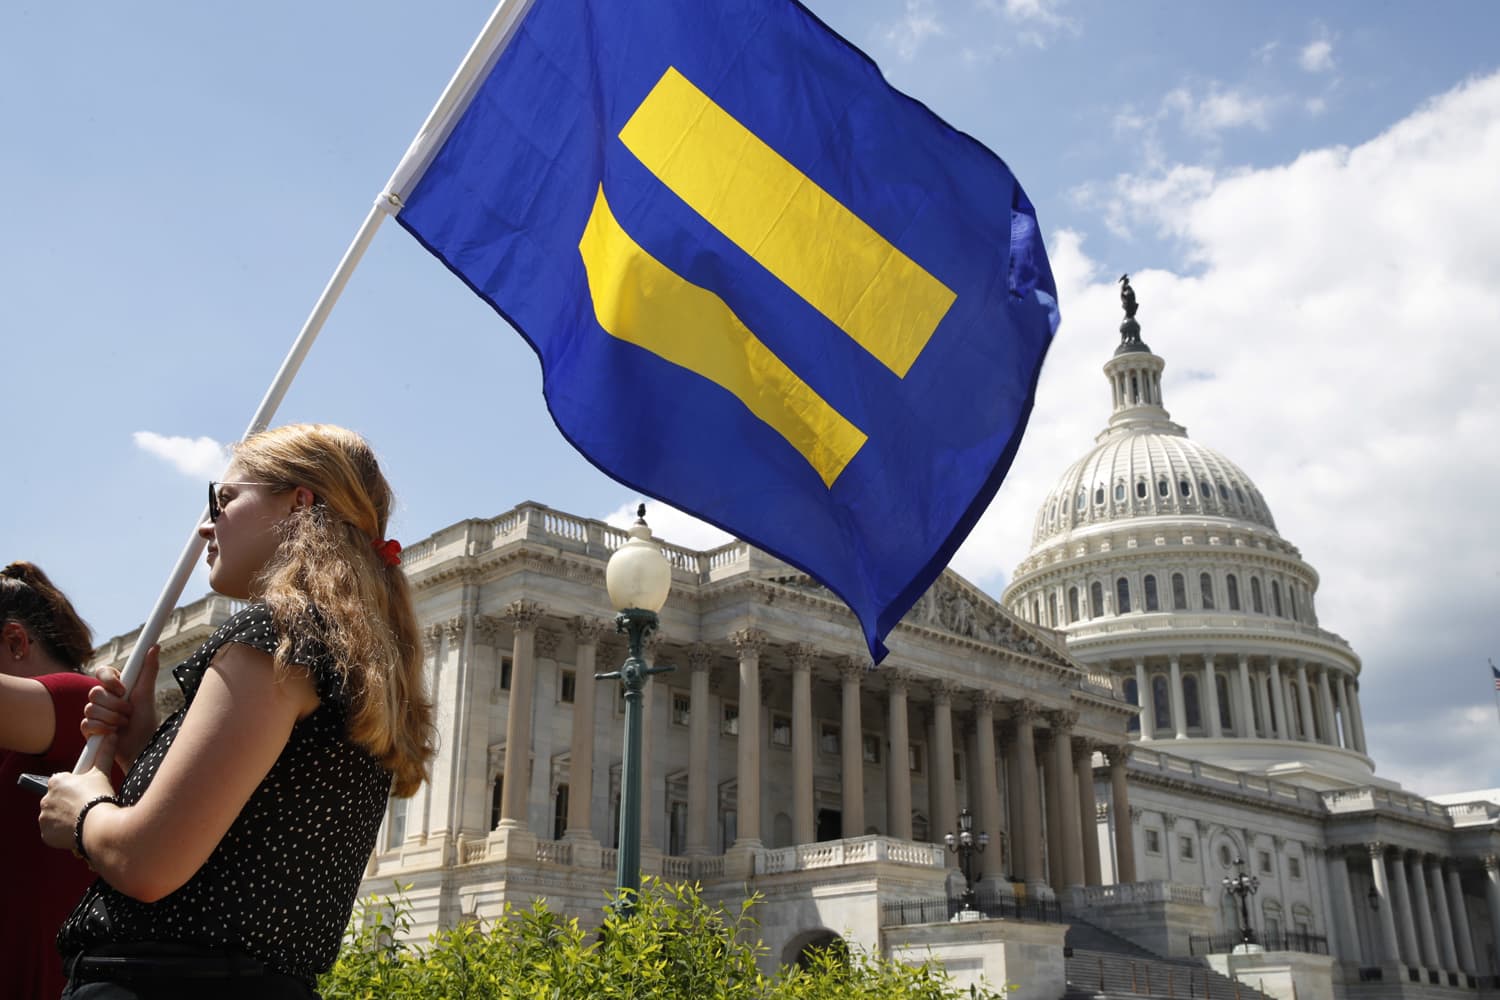 A supporter of LGBT rights holds up an "equality flag" on Capitol Hill in Washington, Wednesday, July 26, 2017. (Jacquelyn Martin/AP)